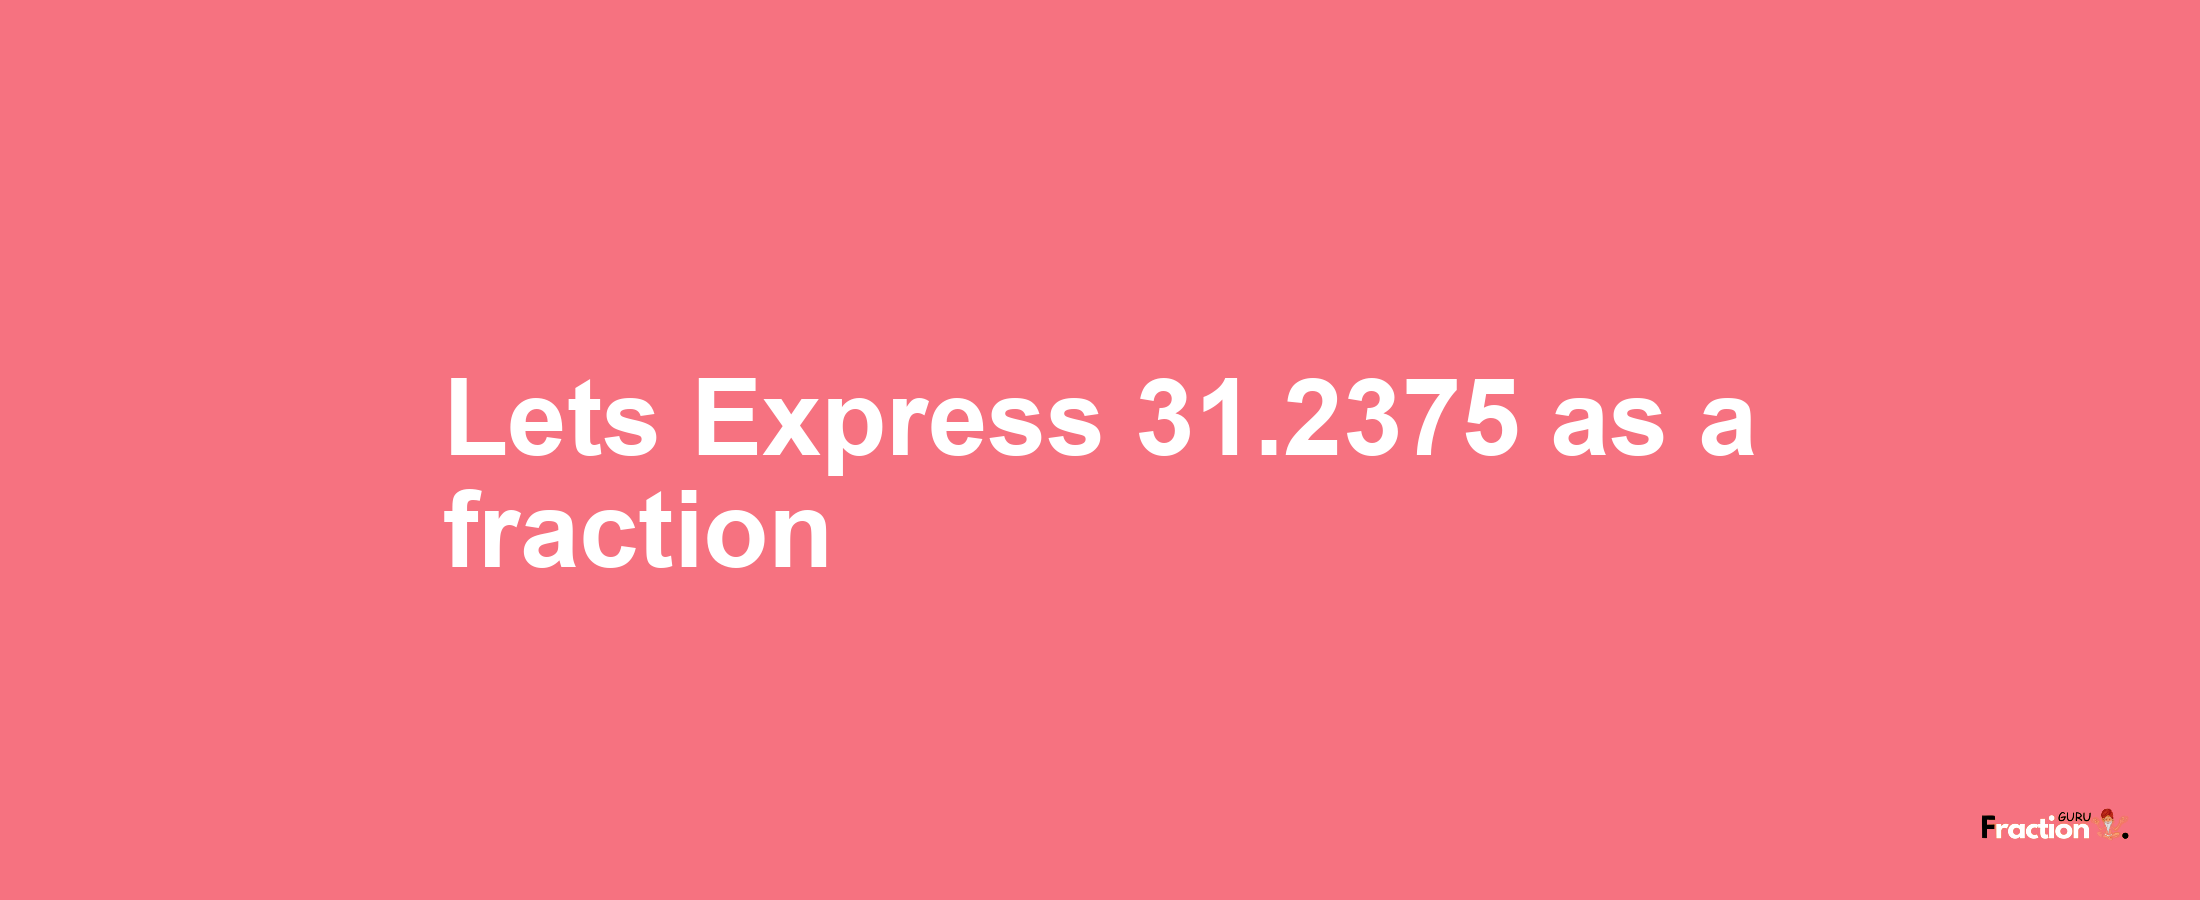 Lets Express 31.2375 as afraction